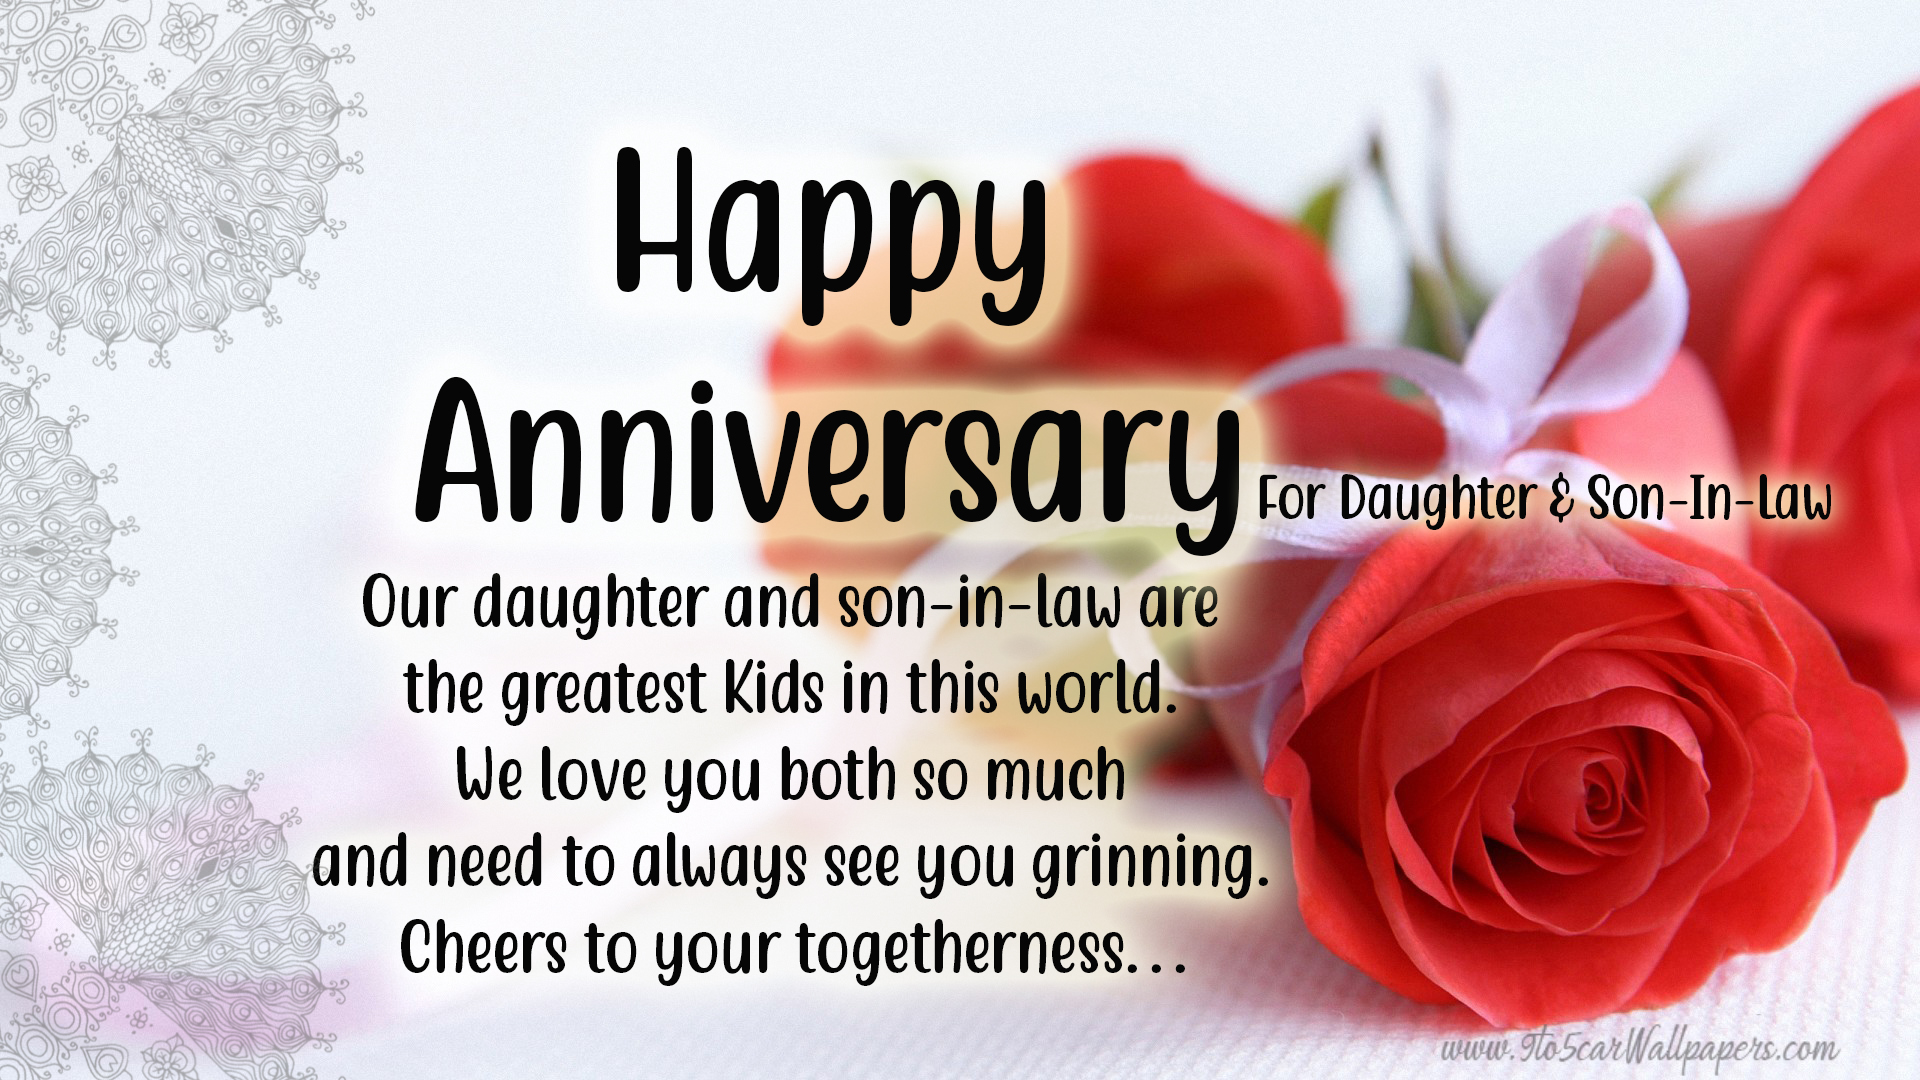 wedding anniversary wishes to daughter All products are discounted, Cheaper  Than Retail Price, Free Delivery & Returns OFF 77%